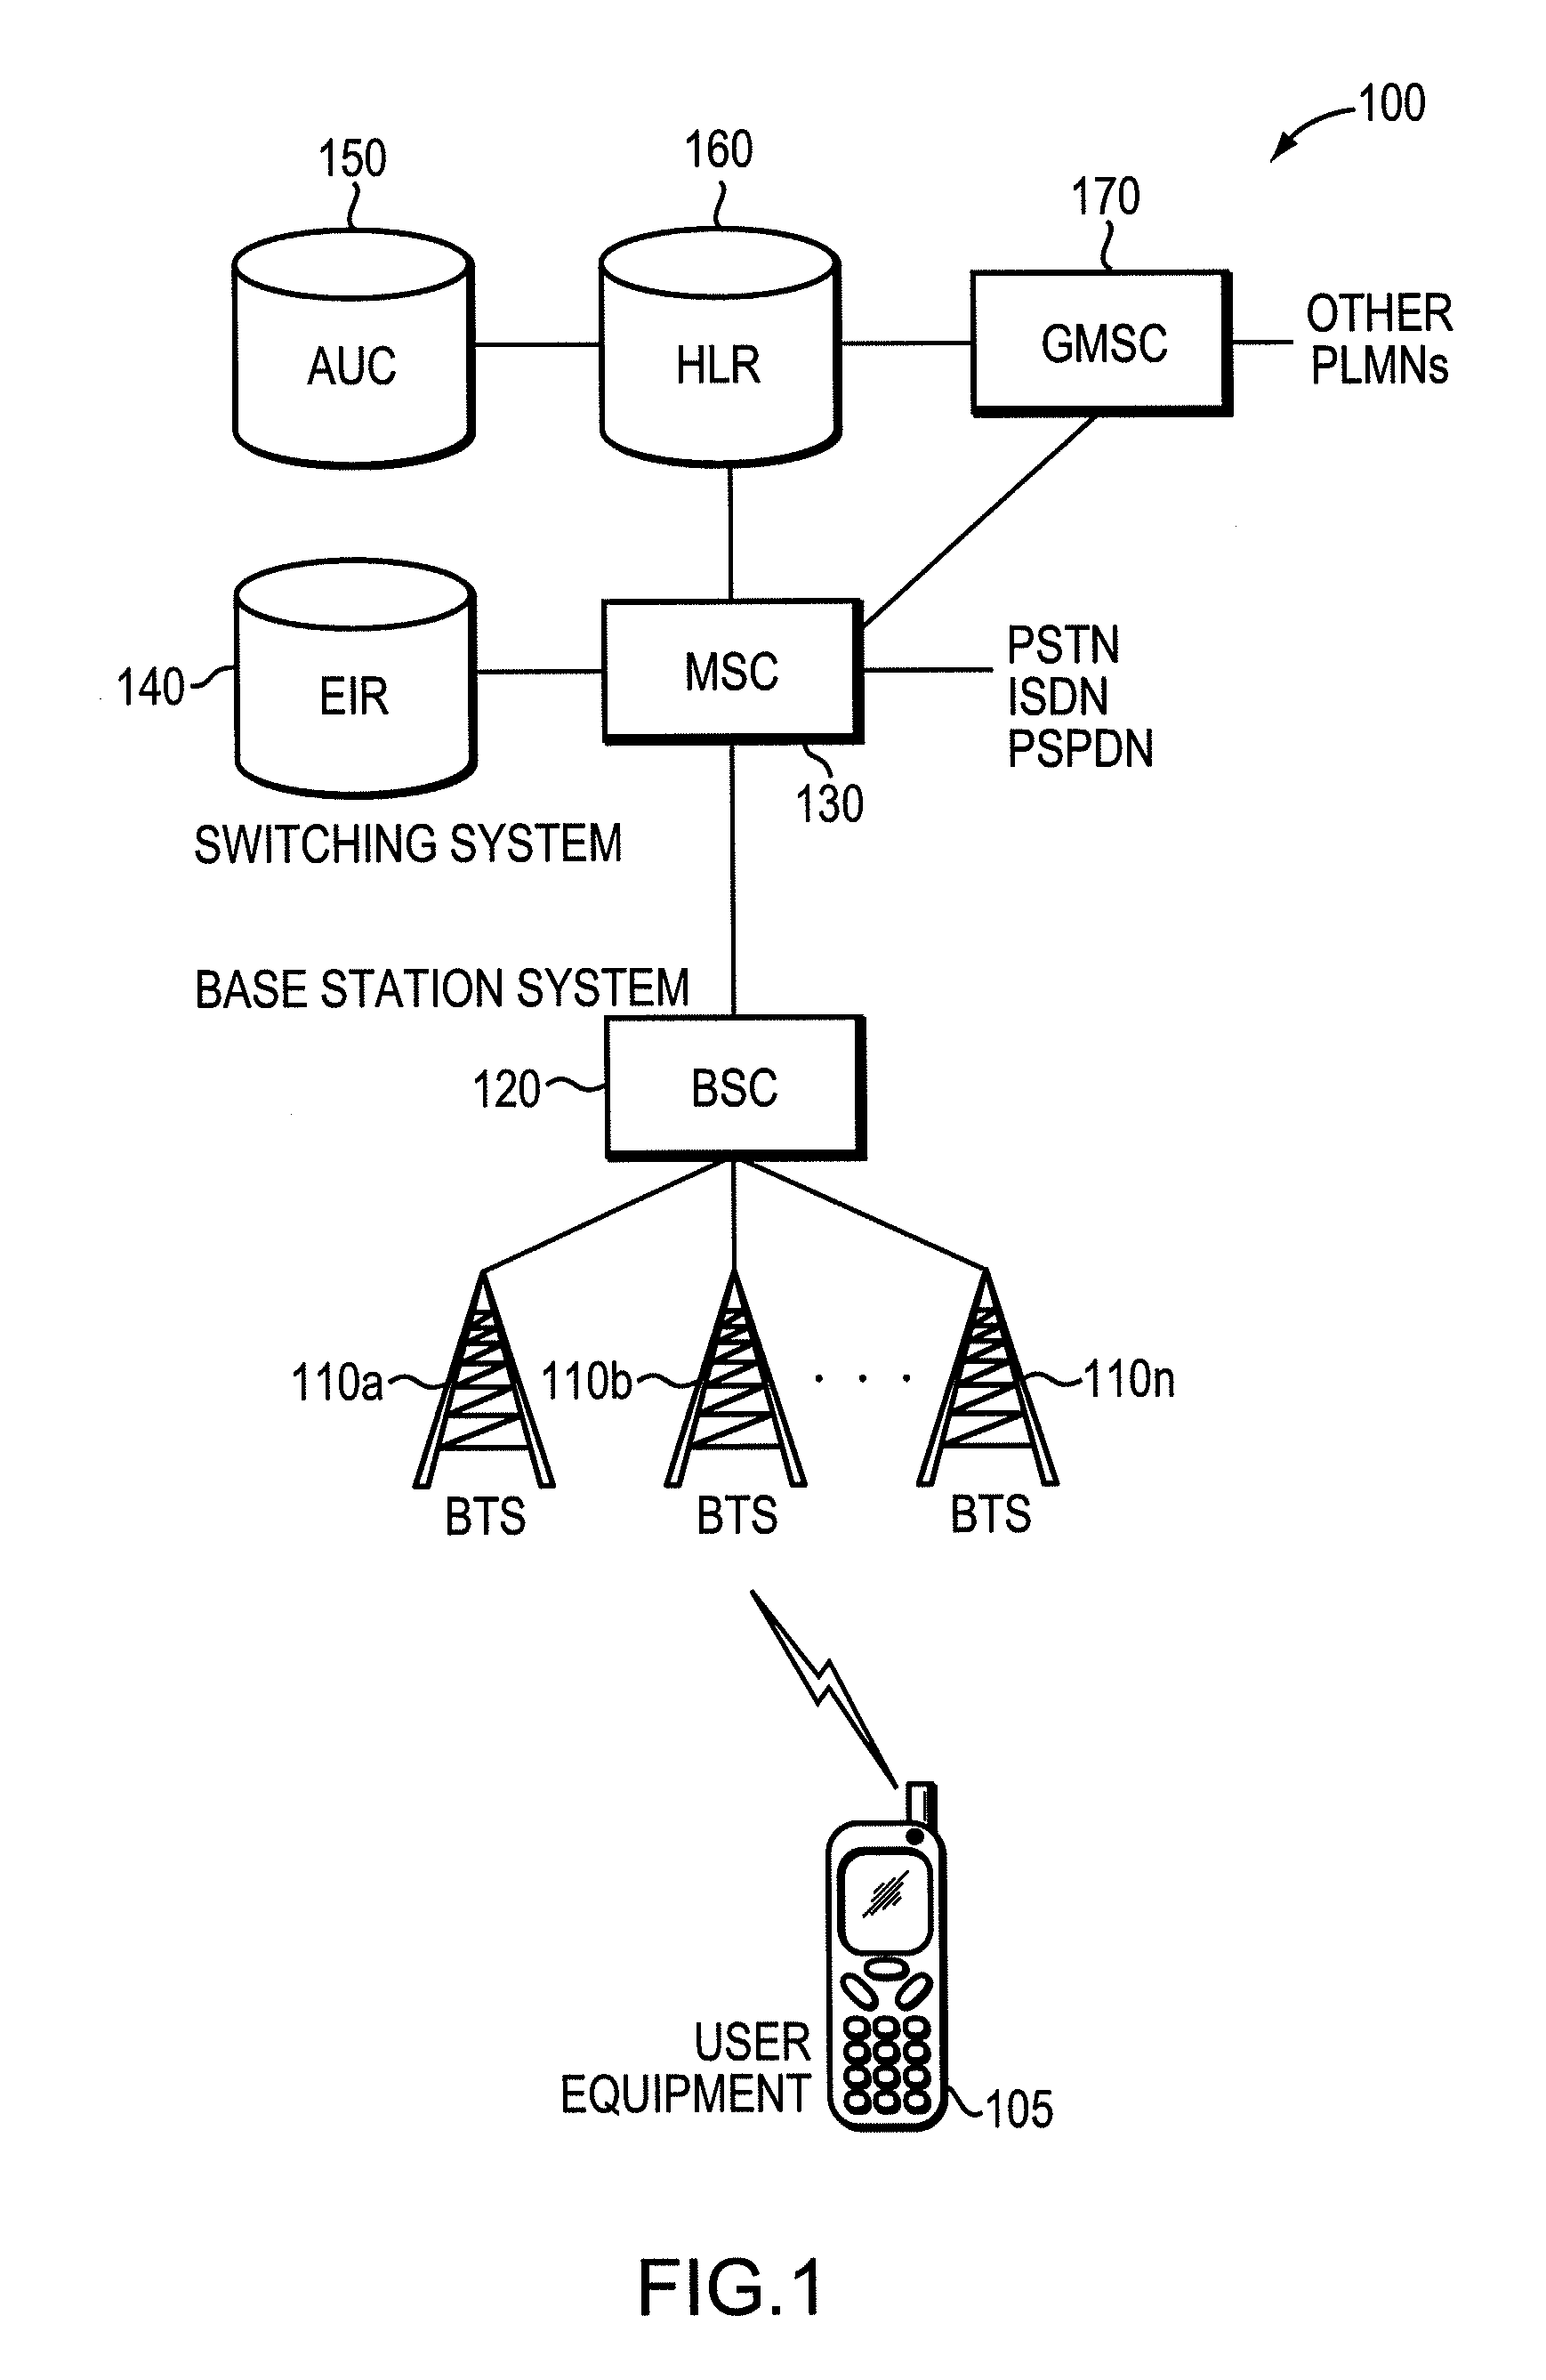 Utilizing Emergency Procedures to Determine Location Information of a Voice Over Internet Protocol Device